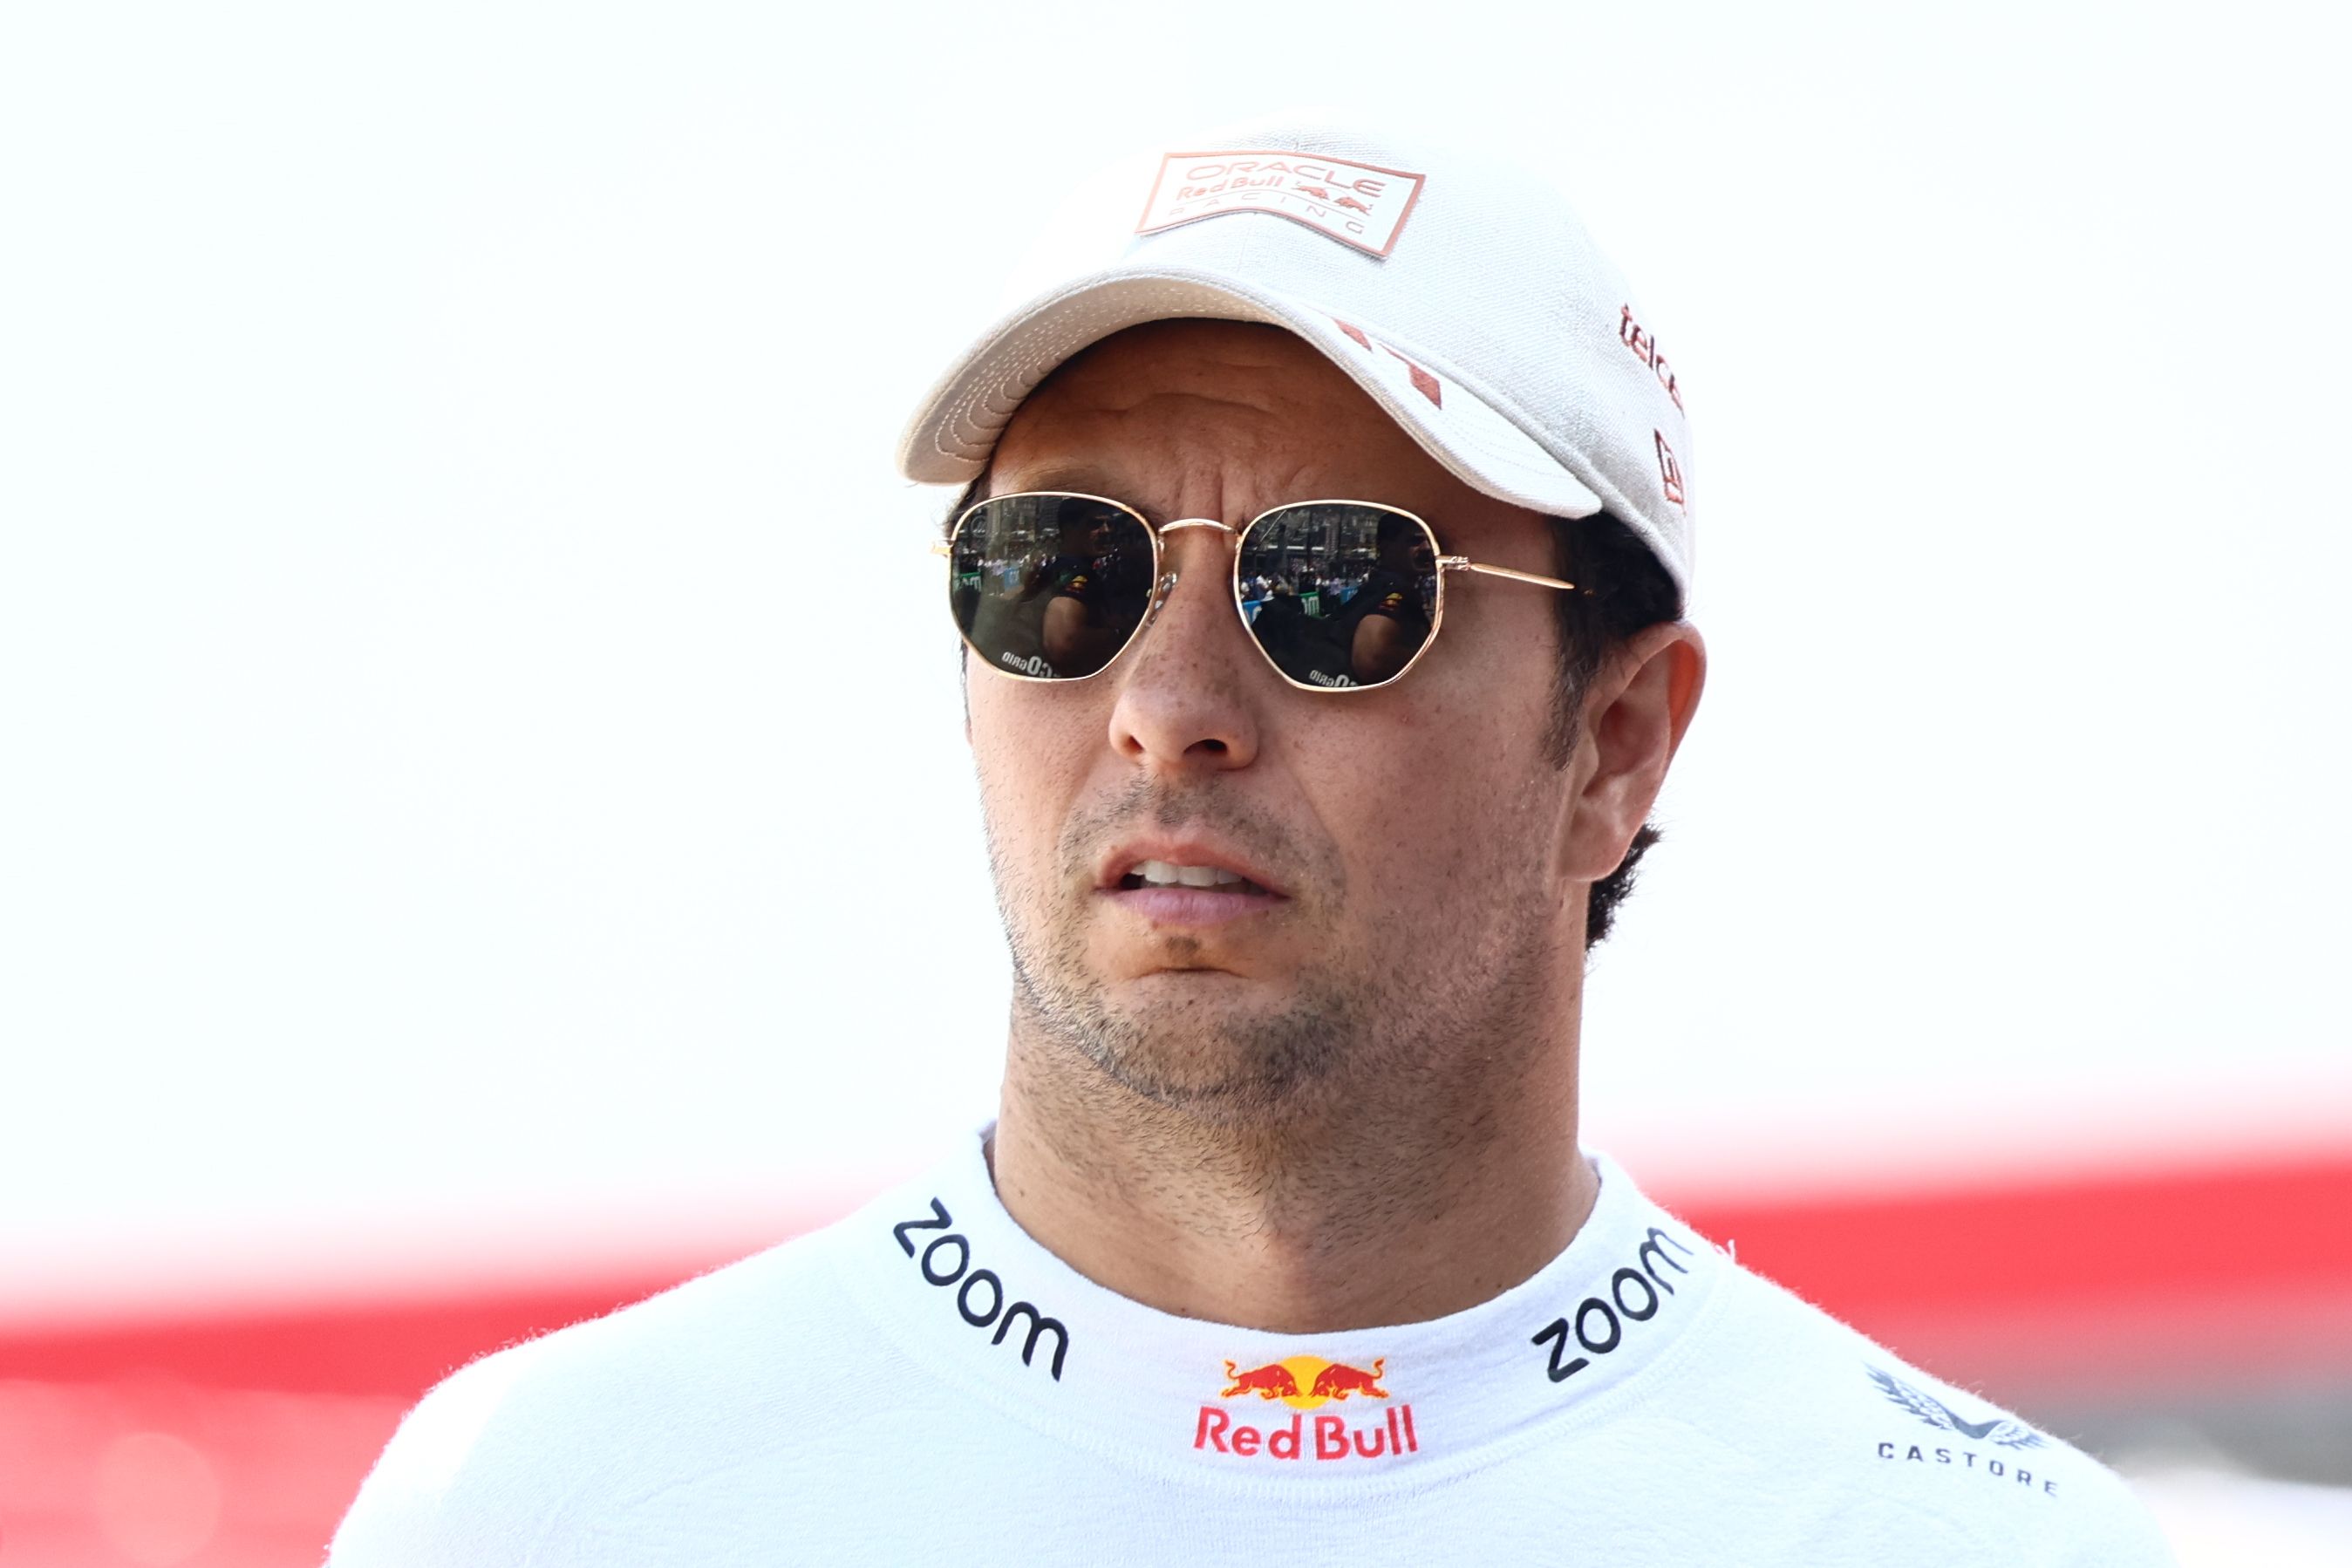 Sergio Perez has signed a new Red Bull deal until 2026